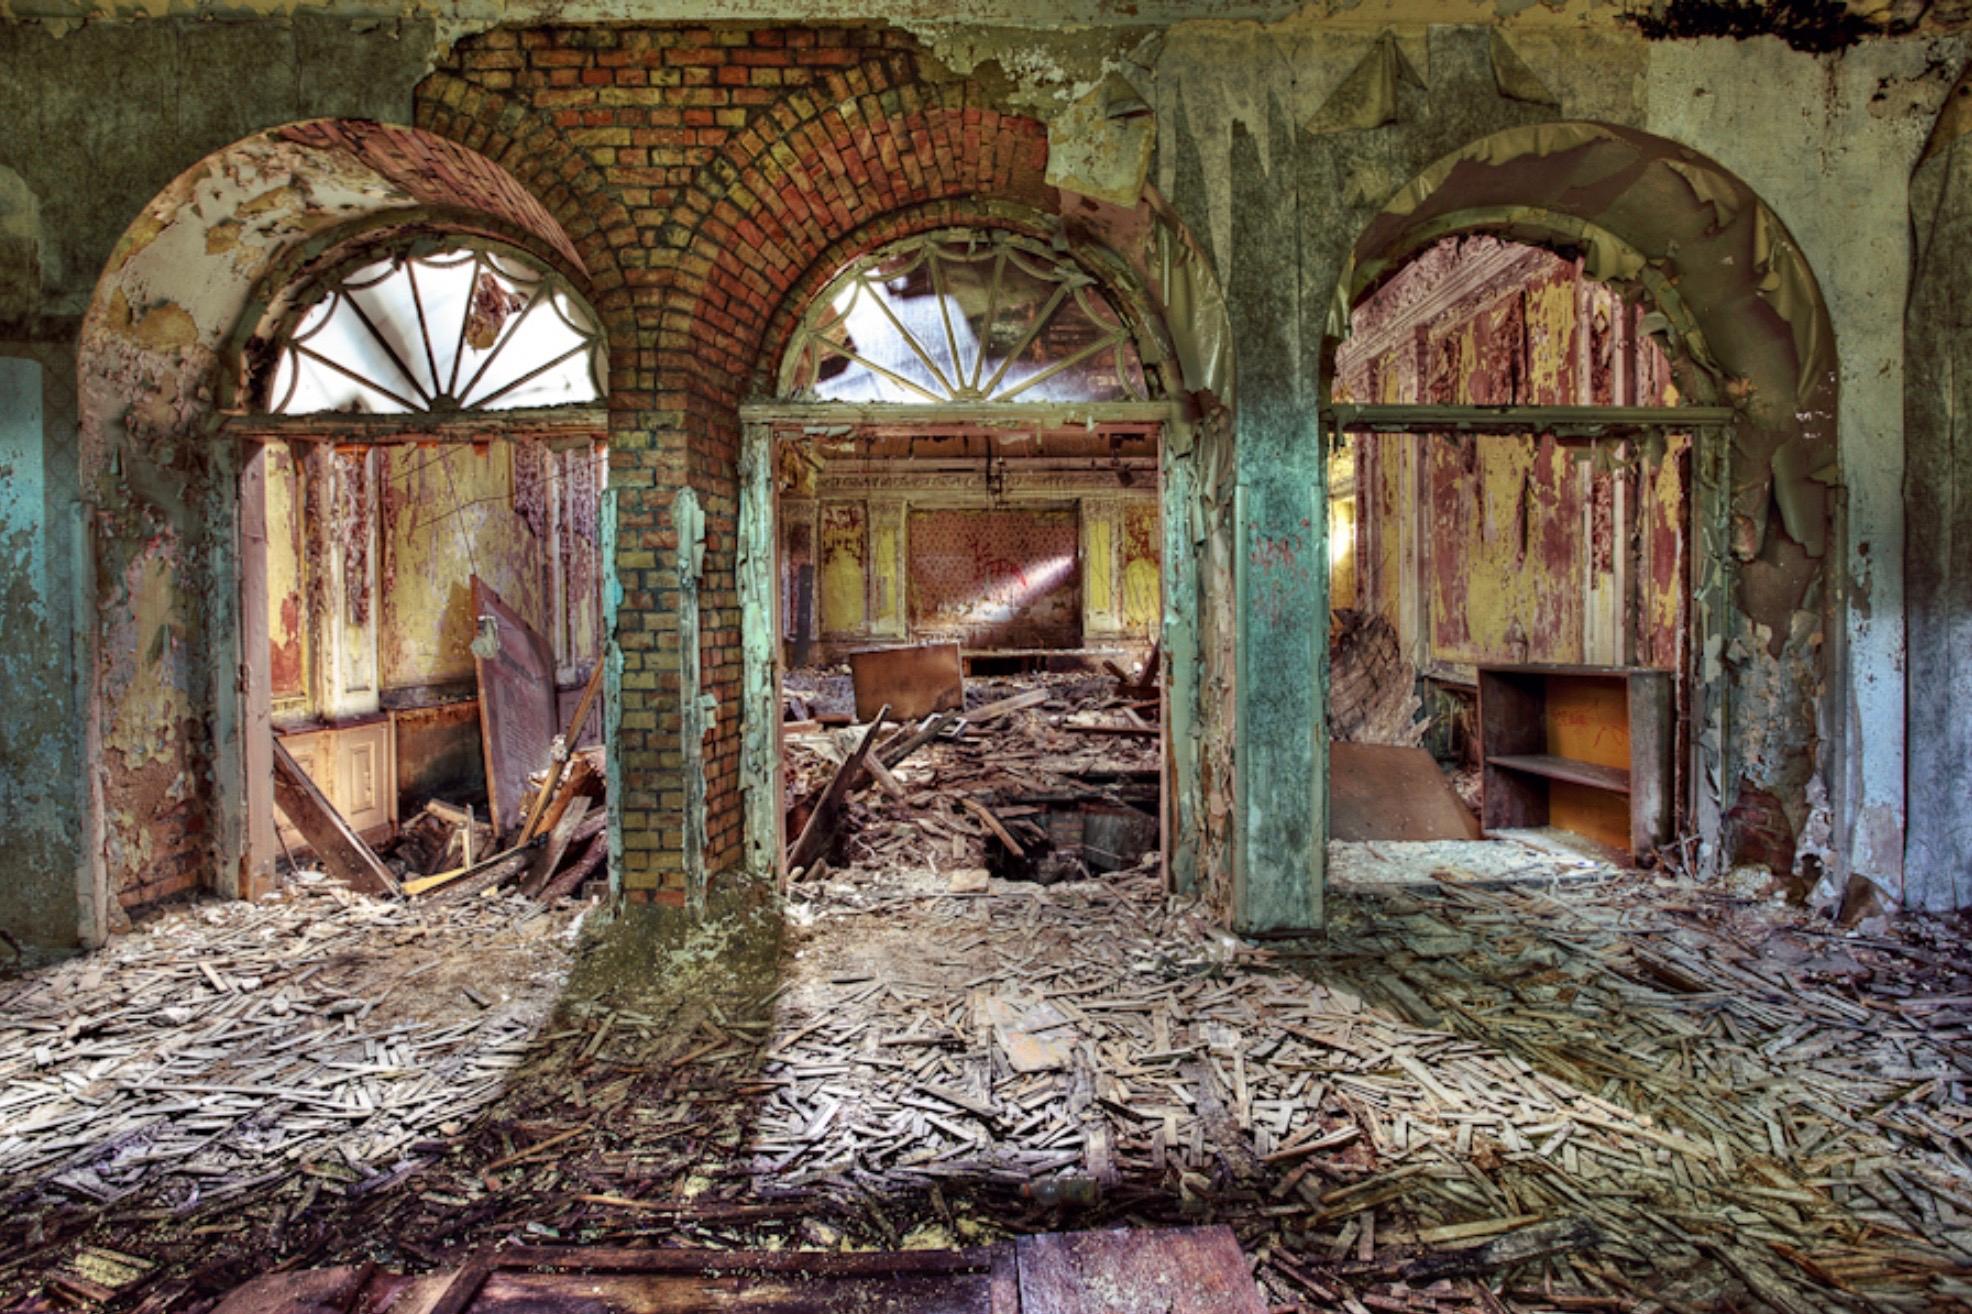 Care Home by Gina Soden - interior photography, abandoned place